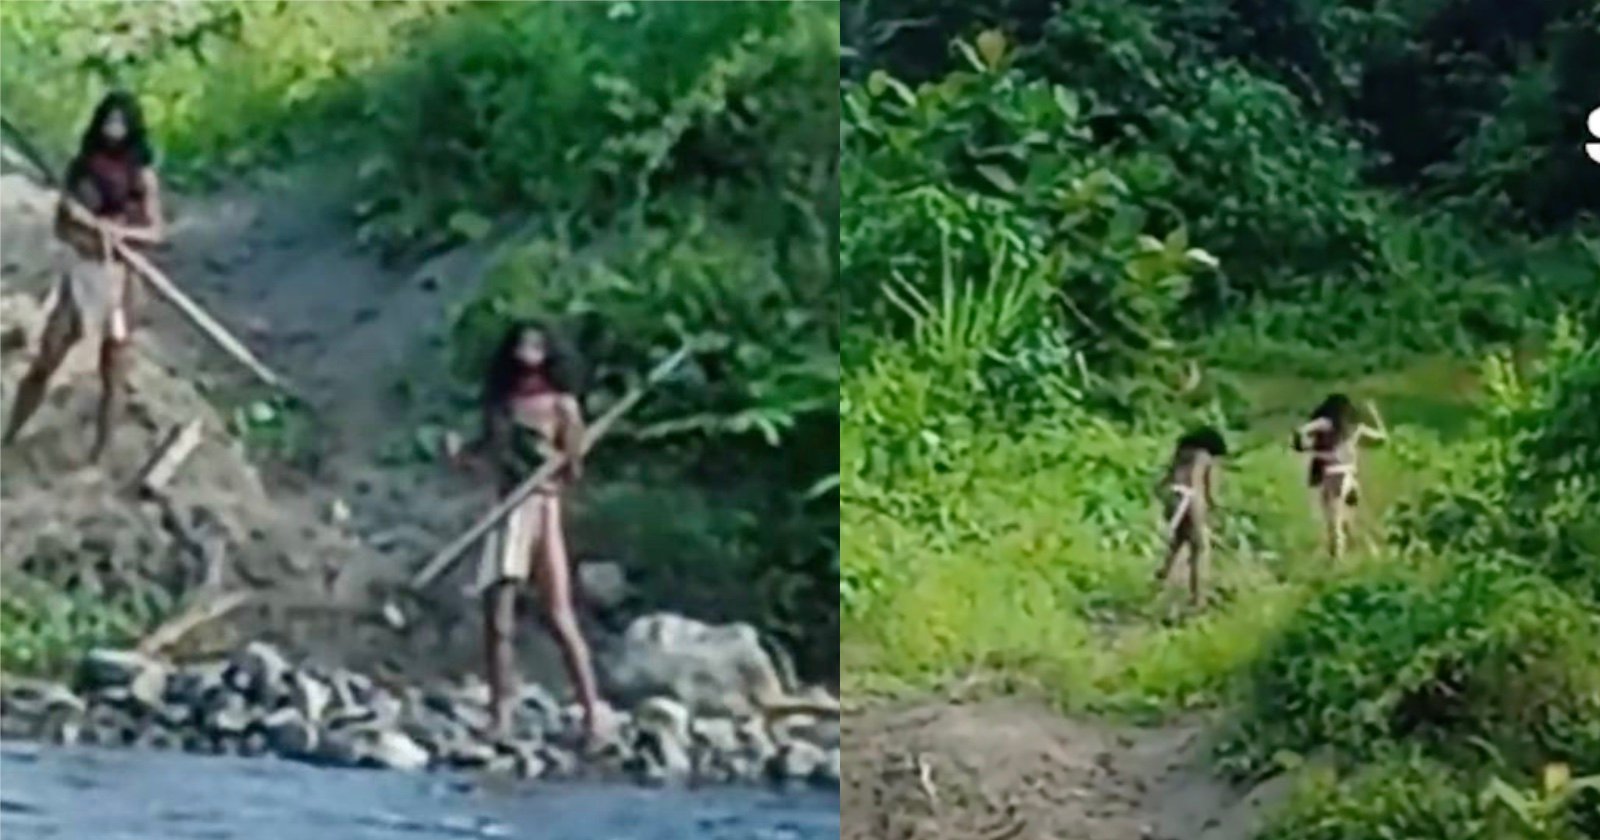 Shocking Footage Shows Uncontacted Tribe Being Met With Bulldozers